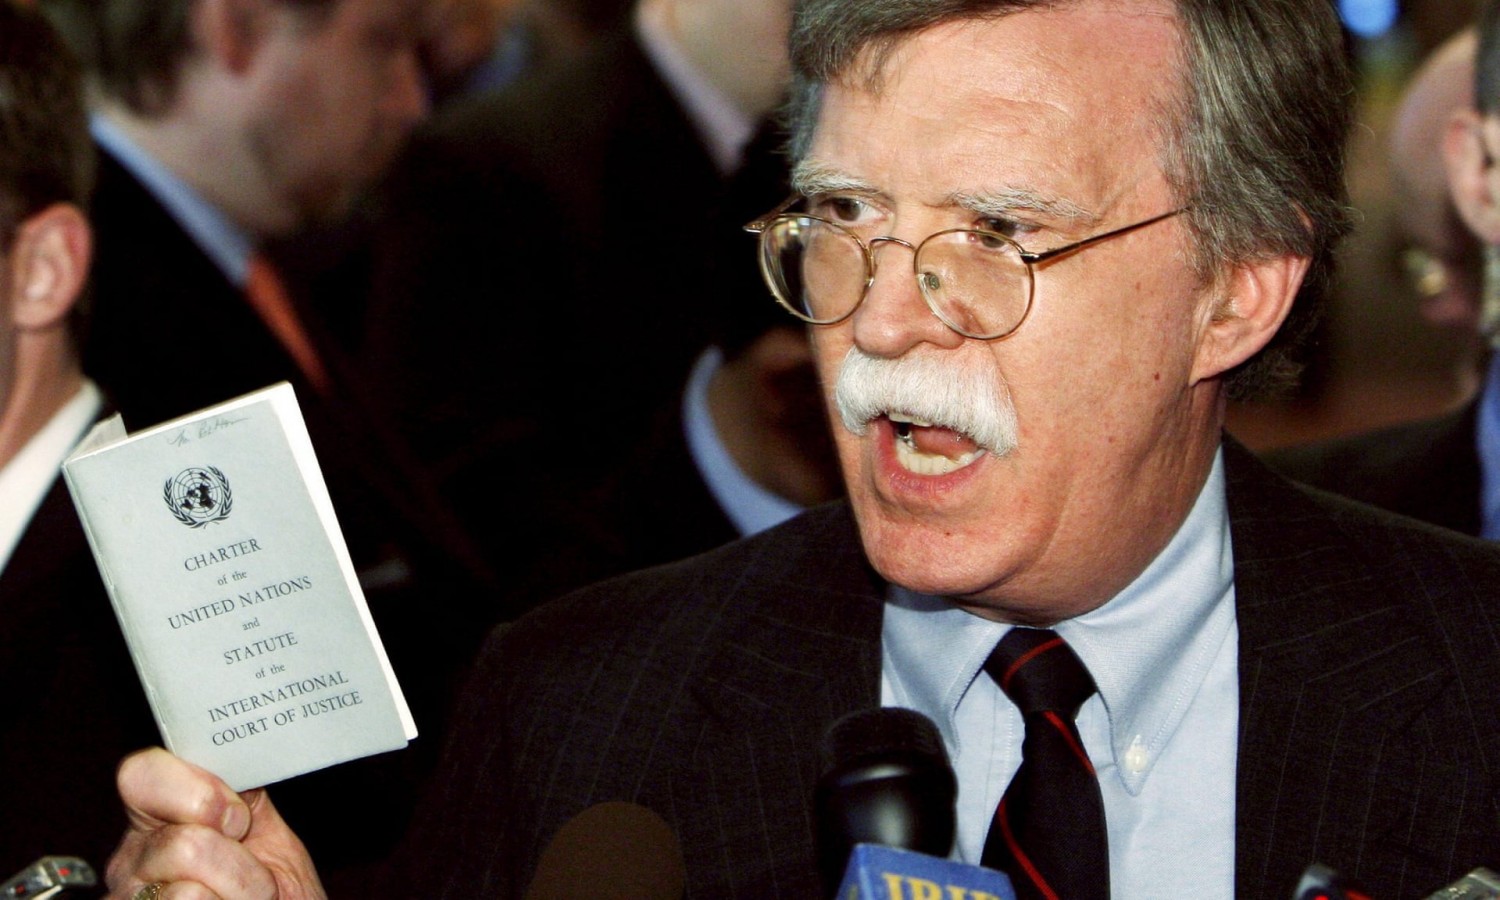  John Bolton in typically pugnacious mood, inveighing against Iran while US ambassador to the United Nations in 2006. Photograph: Justin Lane/EPA